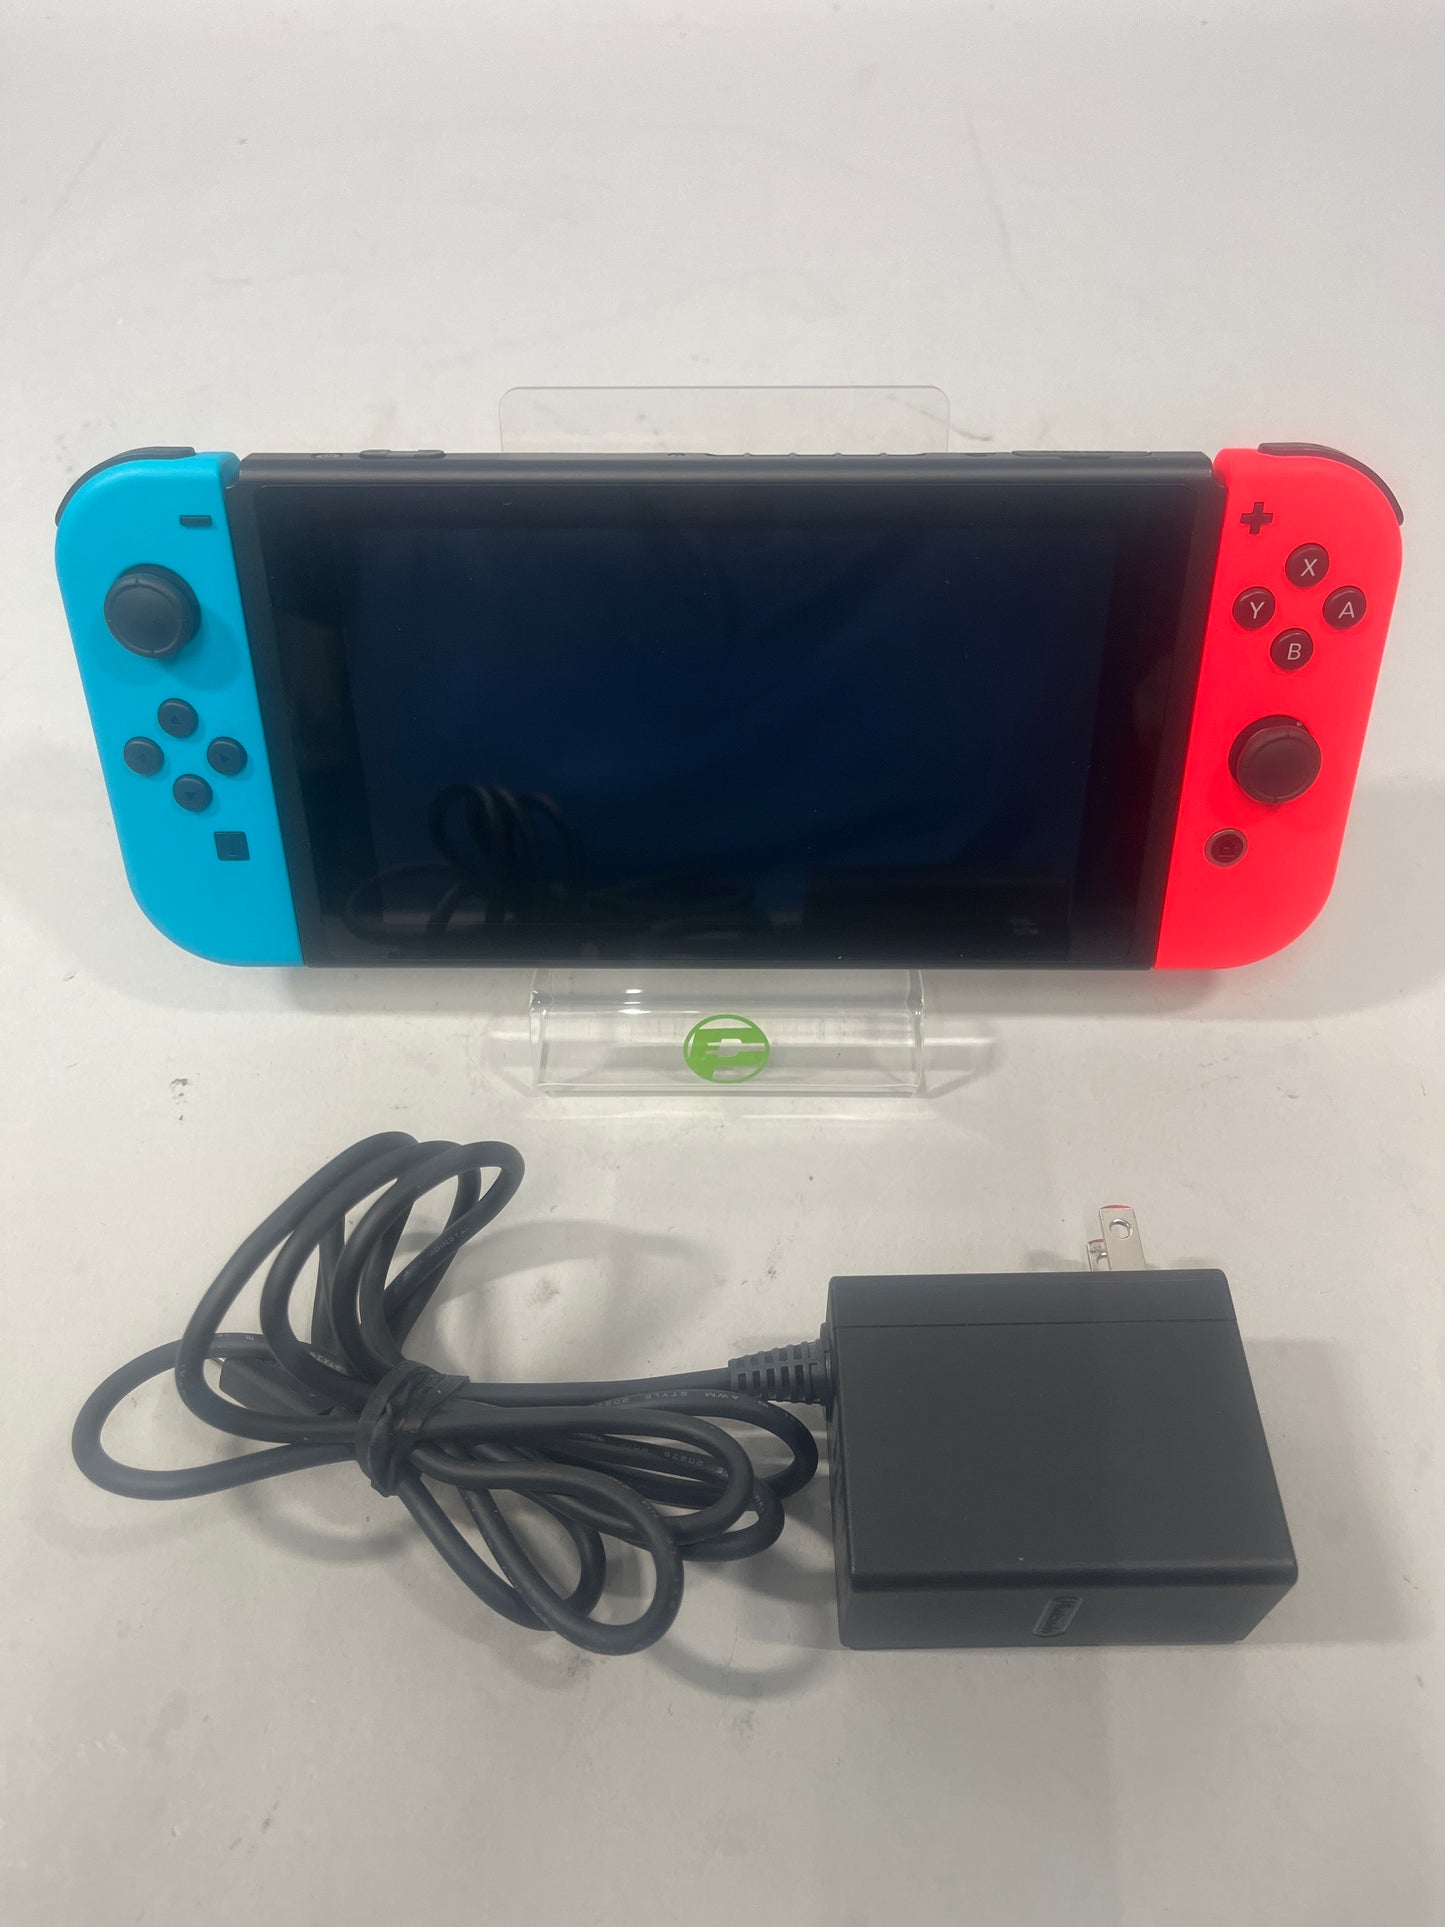 Nintendo Switch v2 Video Game Console HAC-001(-01) Black